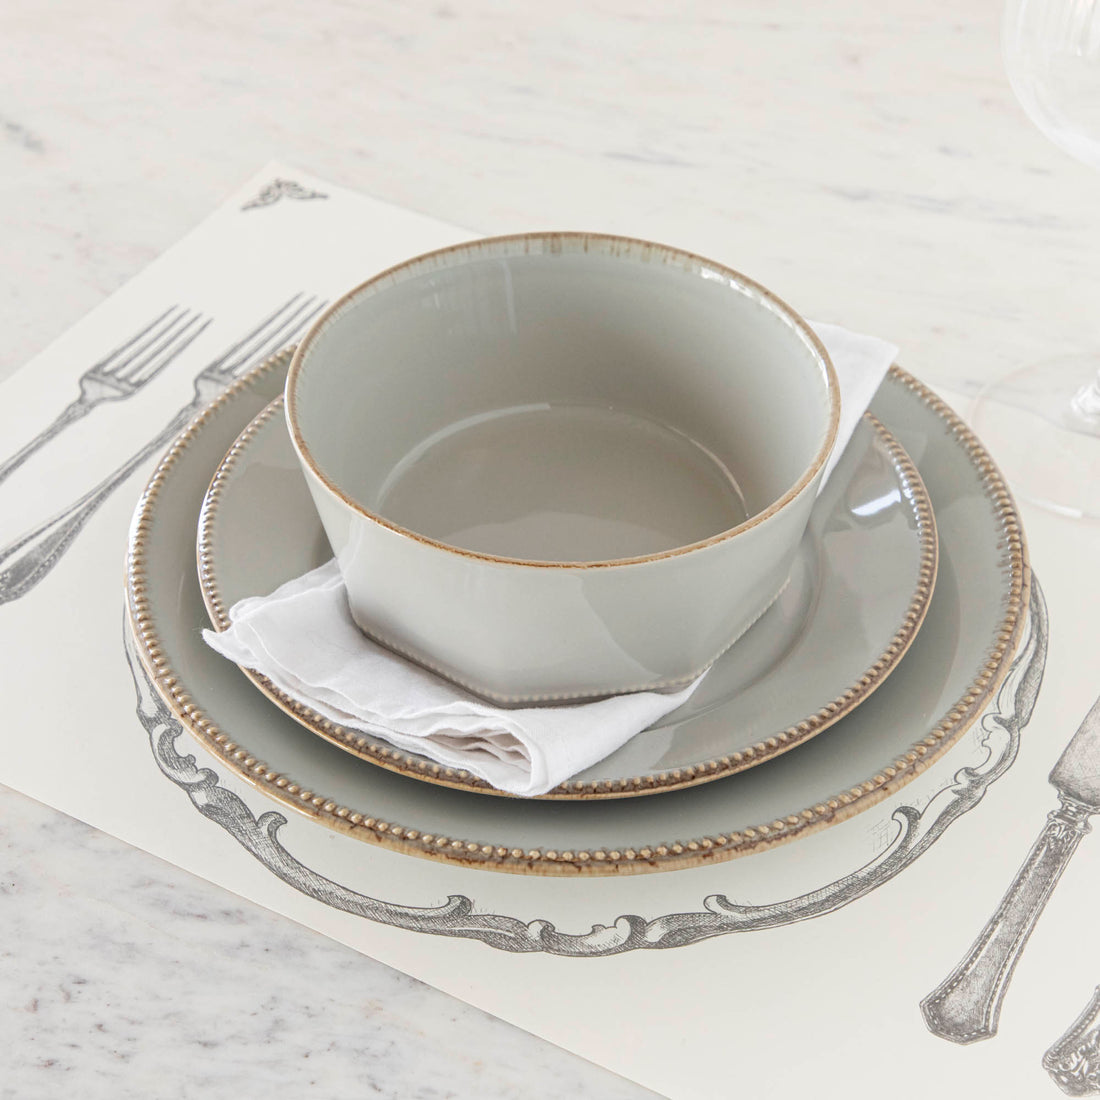 A set of fine stoneware plates and bowls from the Luzia Ash Grey Round Dinnerware collection by Costa Nova on a white surface, perfect for a modern table setting.